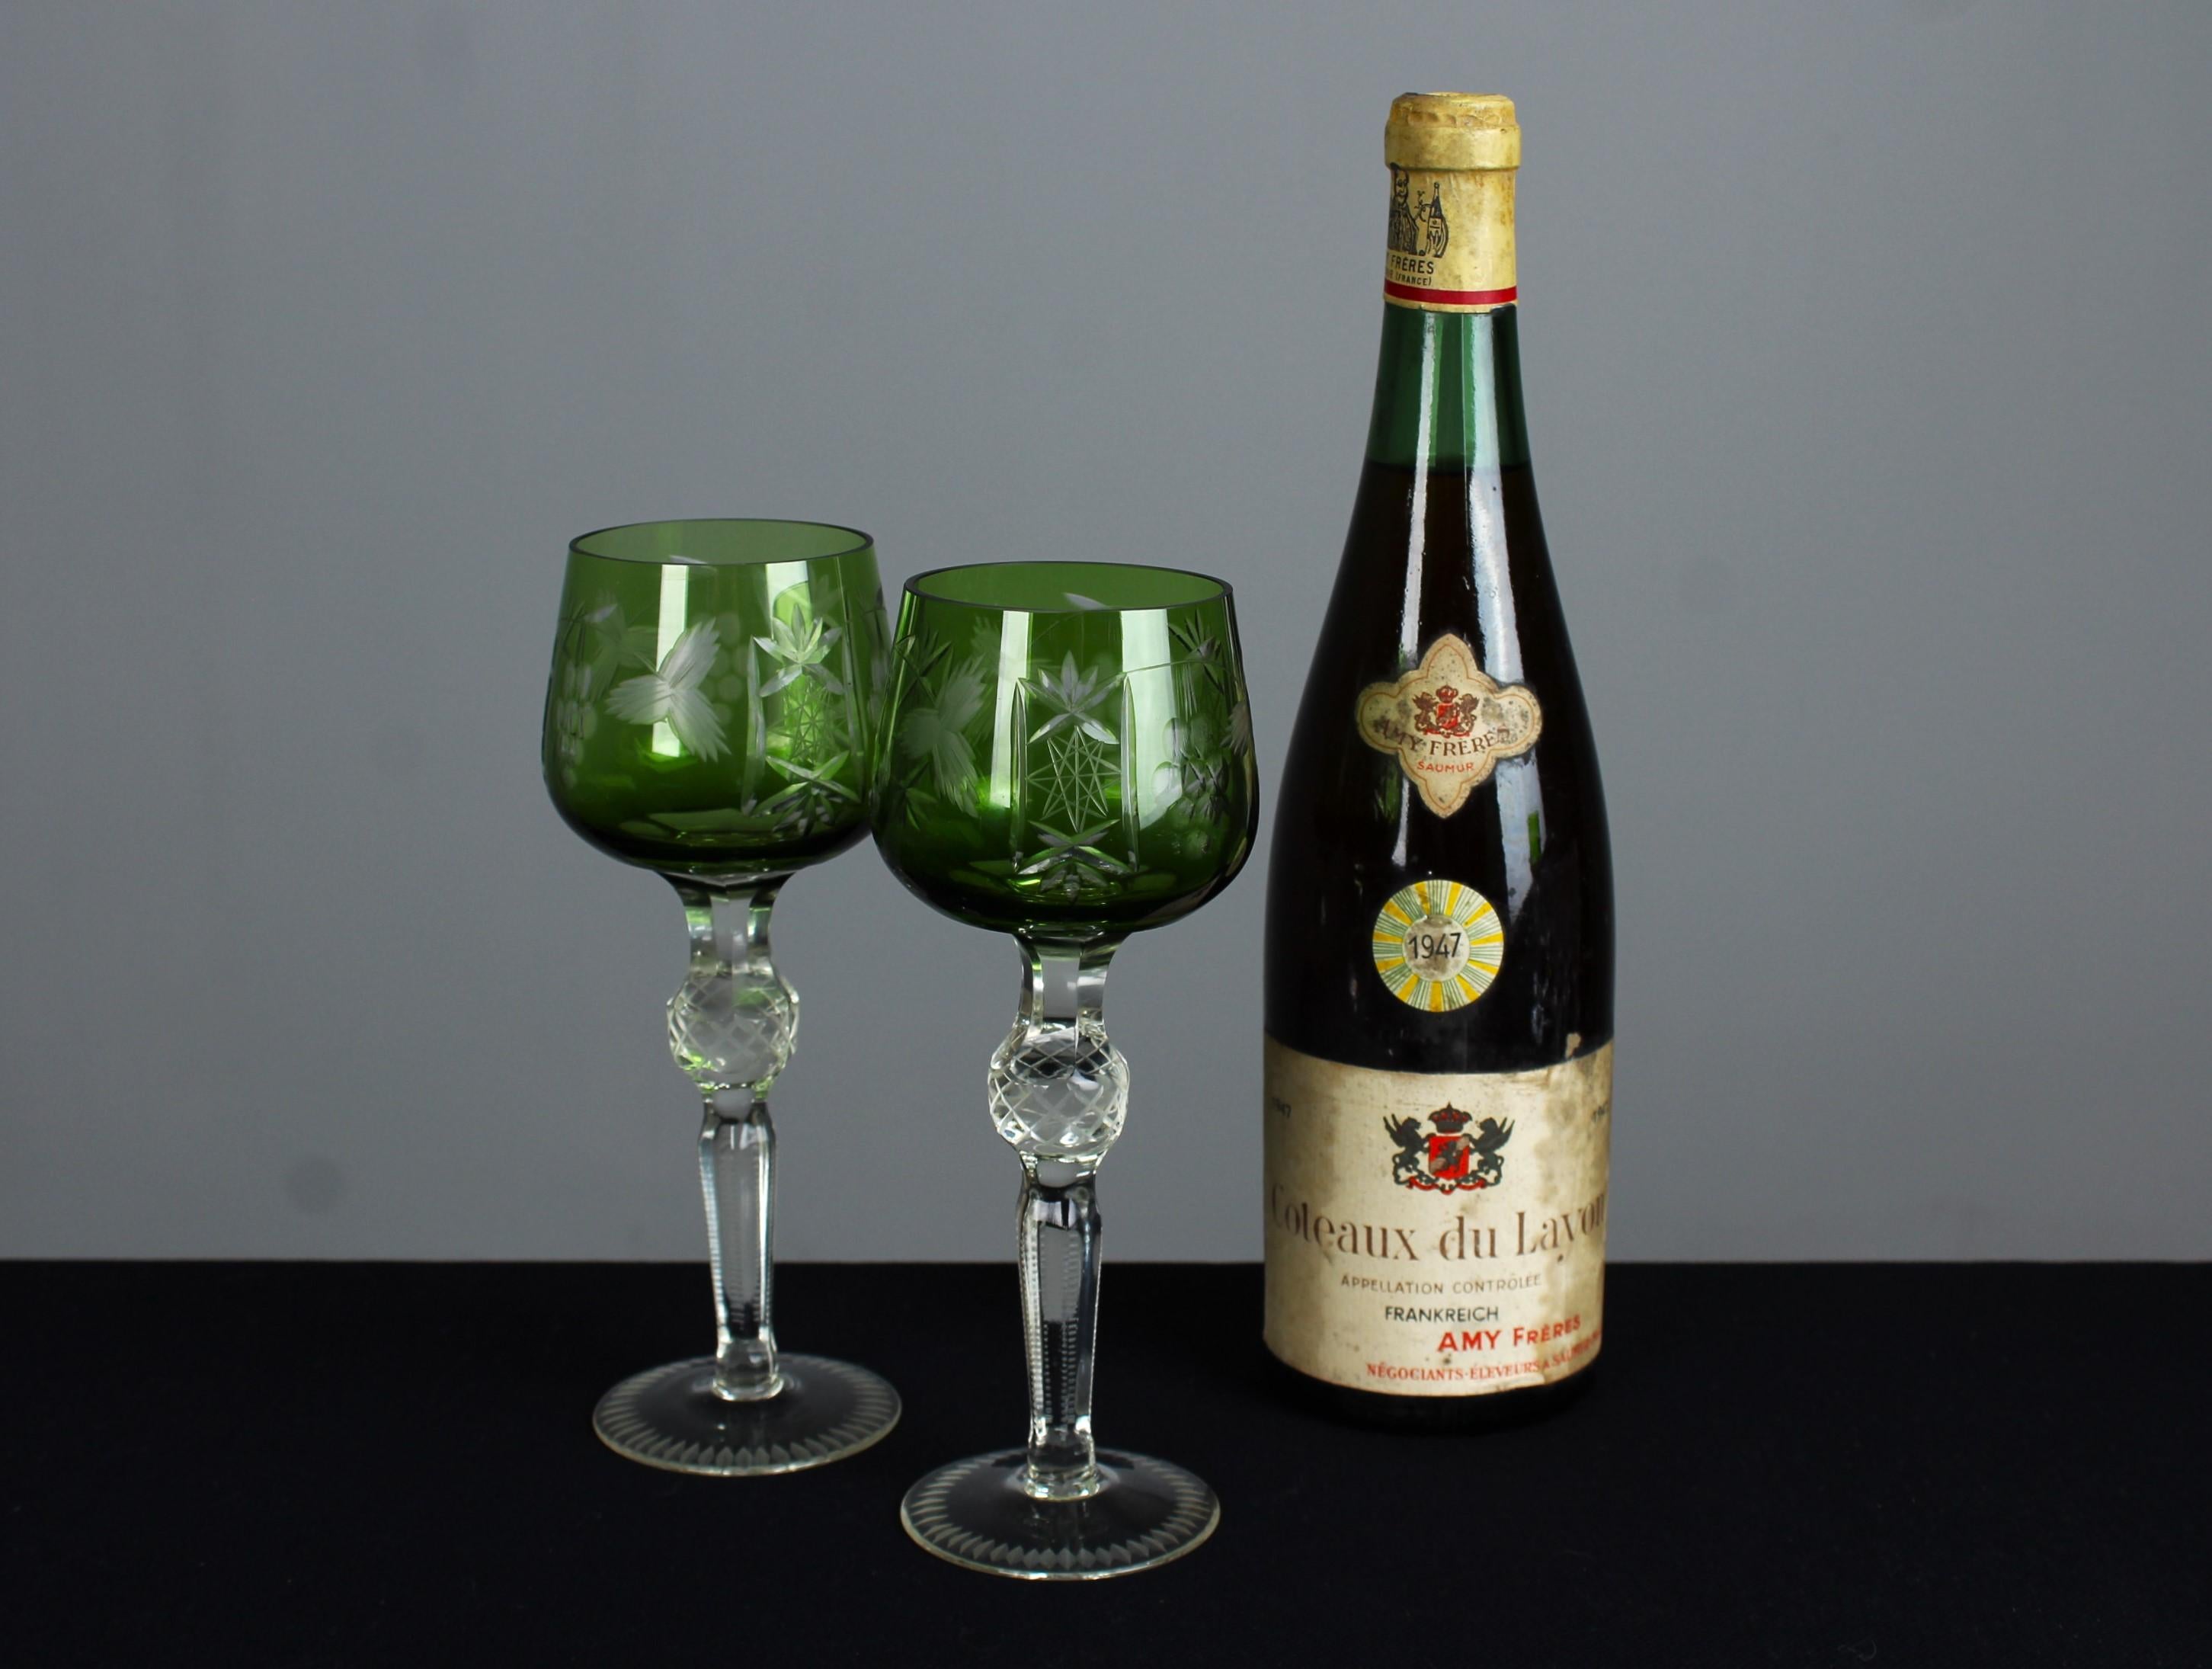 A beautiful pair of antique wine glasses with decorative hand-carved design. Beautiful green coloured glass.

At the turn of the 20th century, the French culture of fine dining and socialising flourished, leading to the emergence of a symbol of